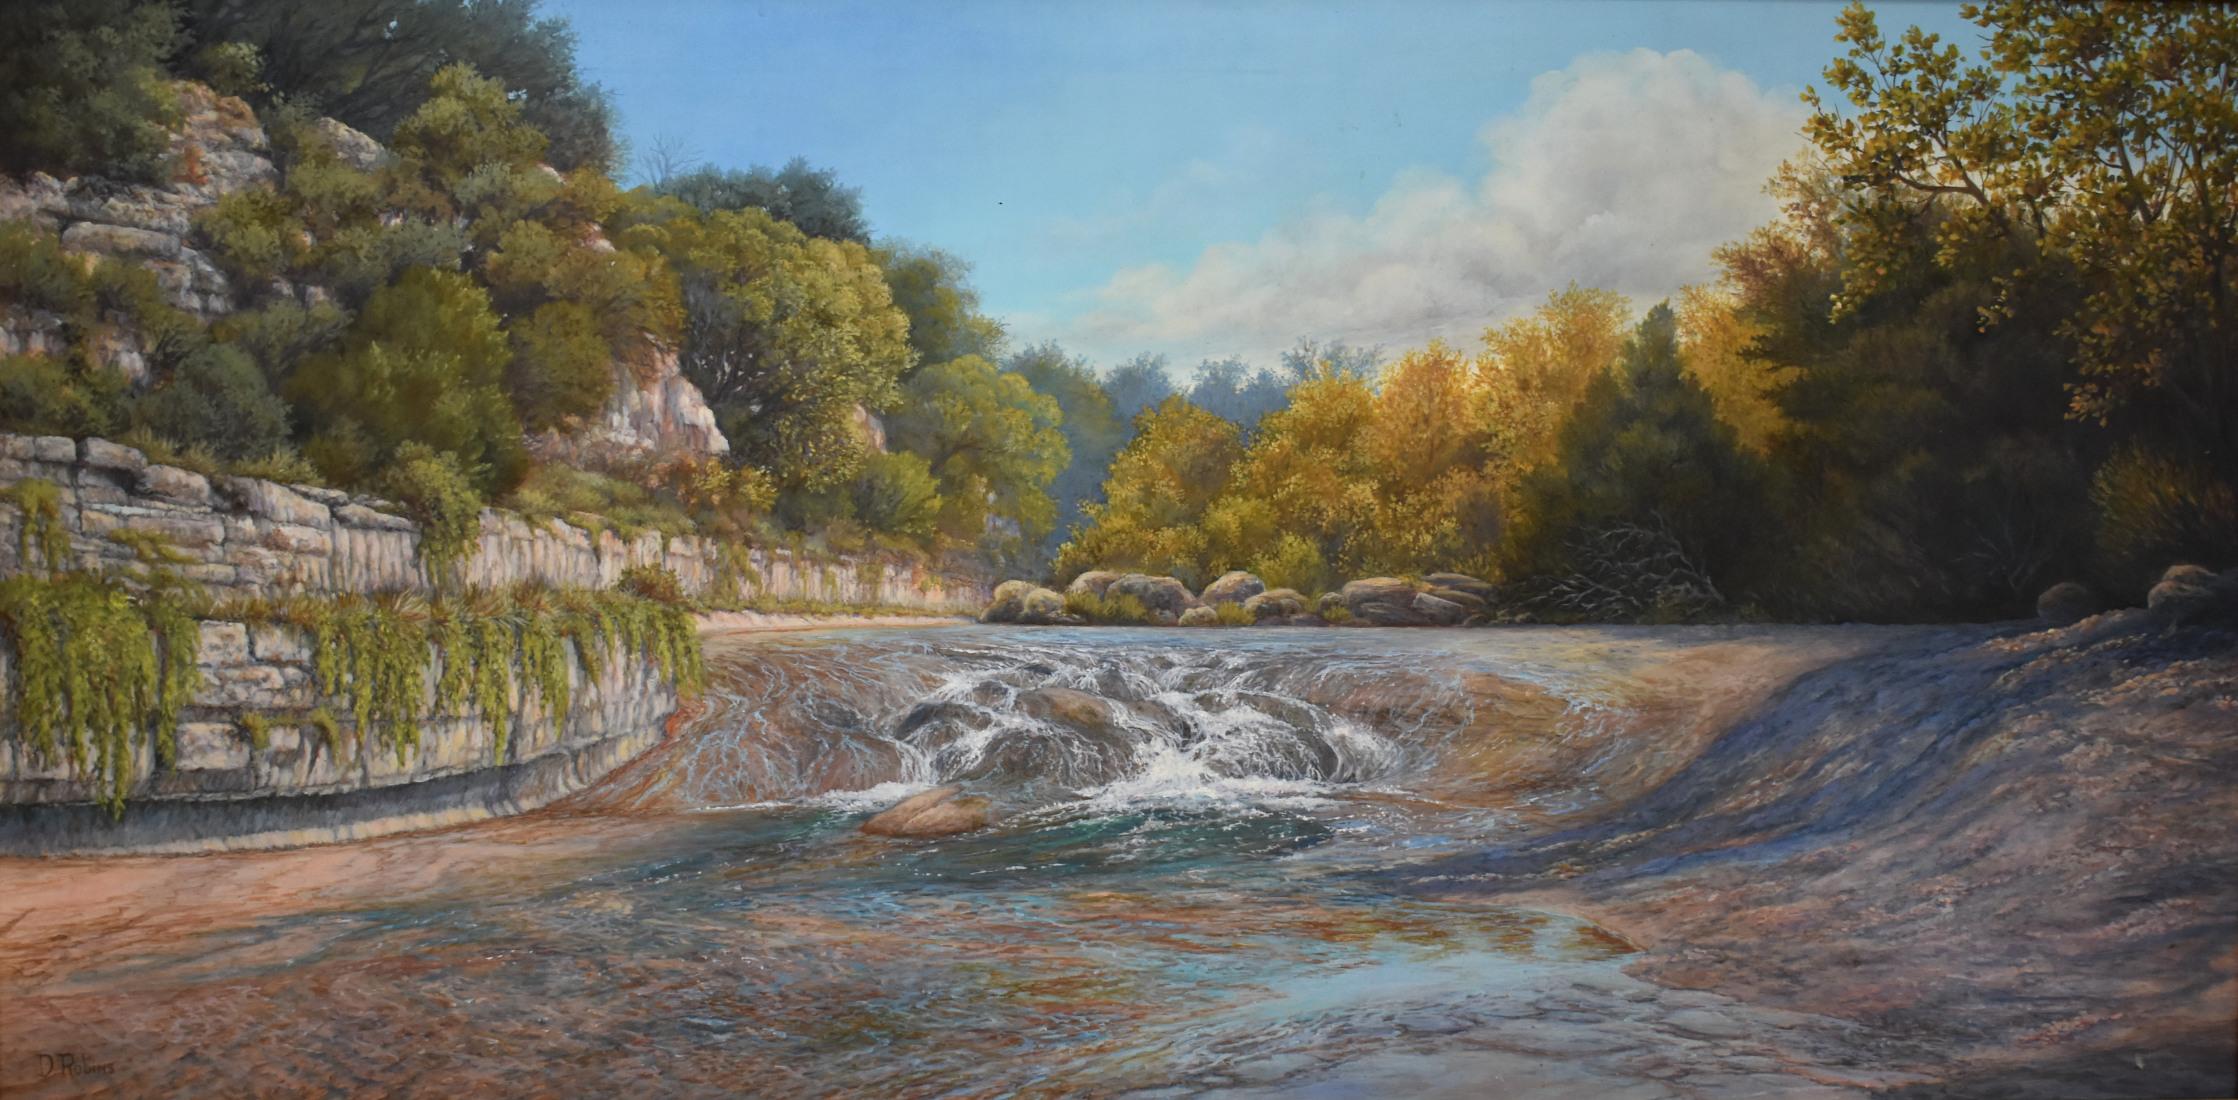 Landscape Painting D. Robins - "Rushing River" Texas Landscape